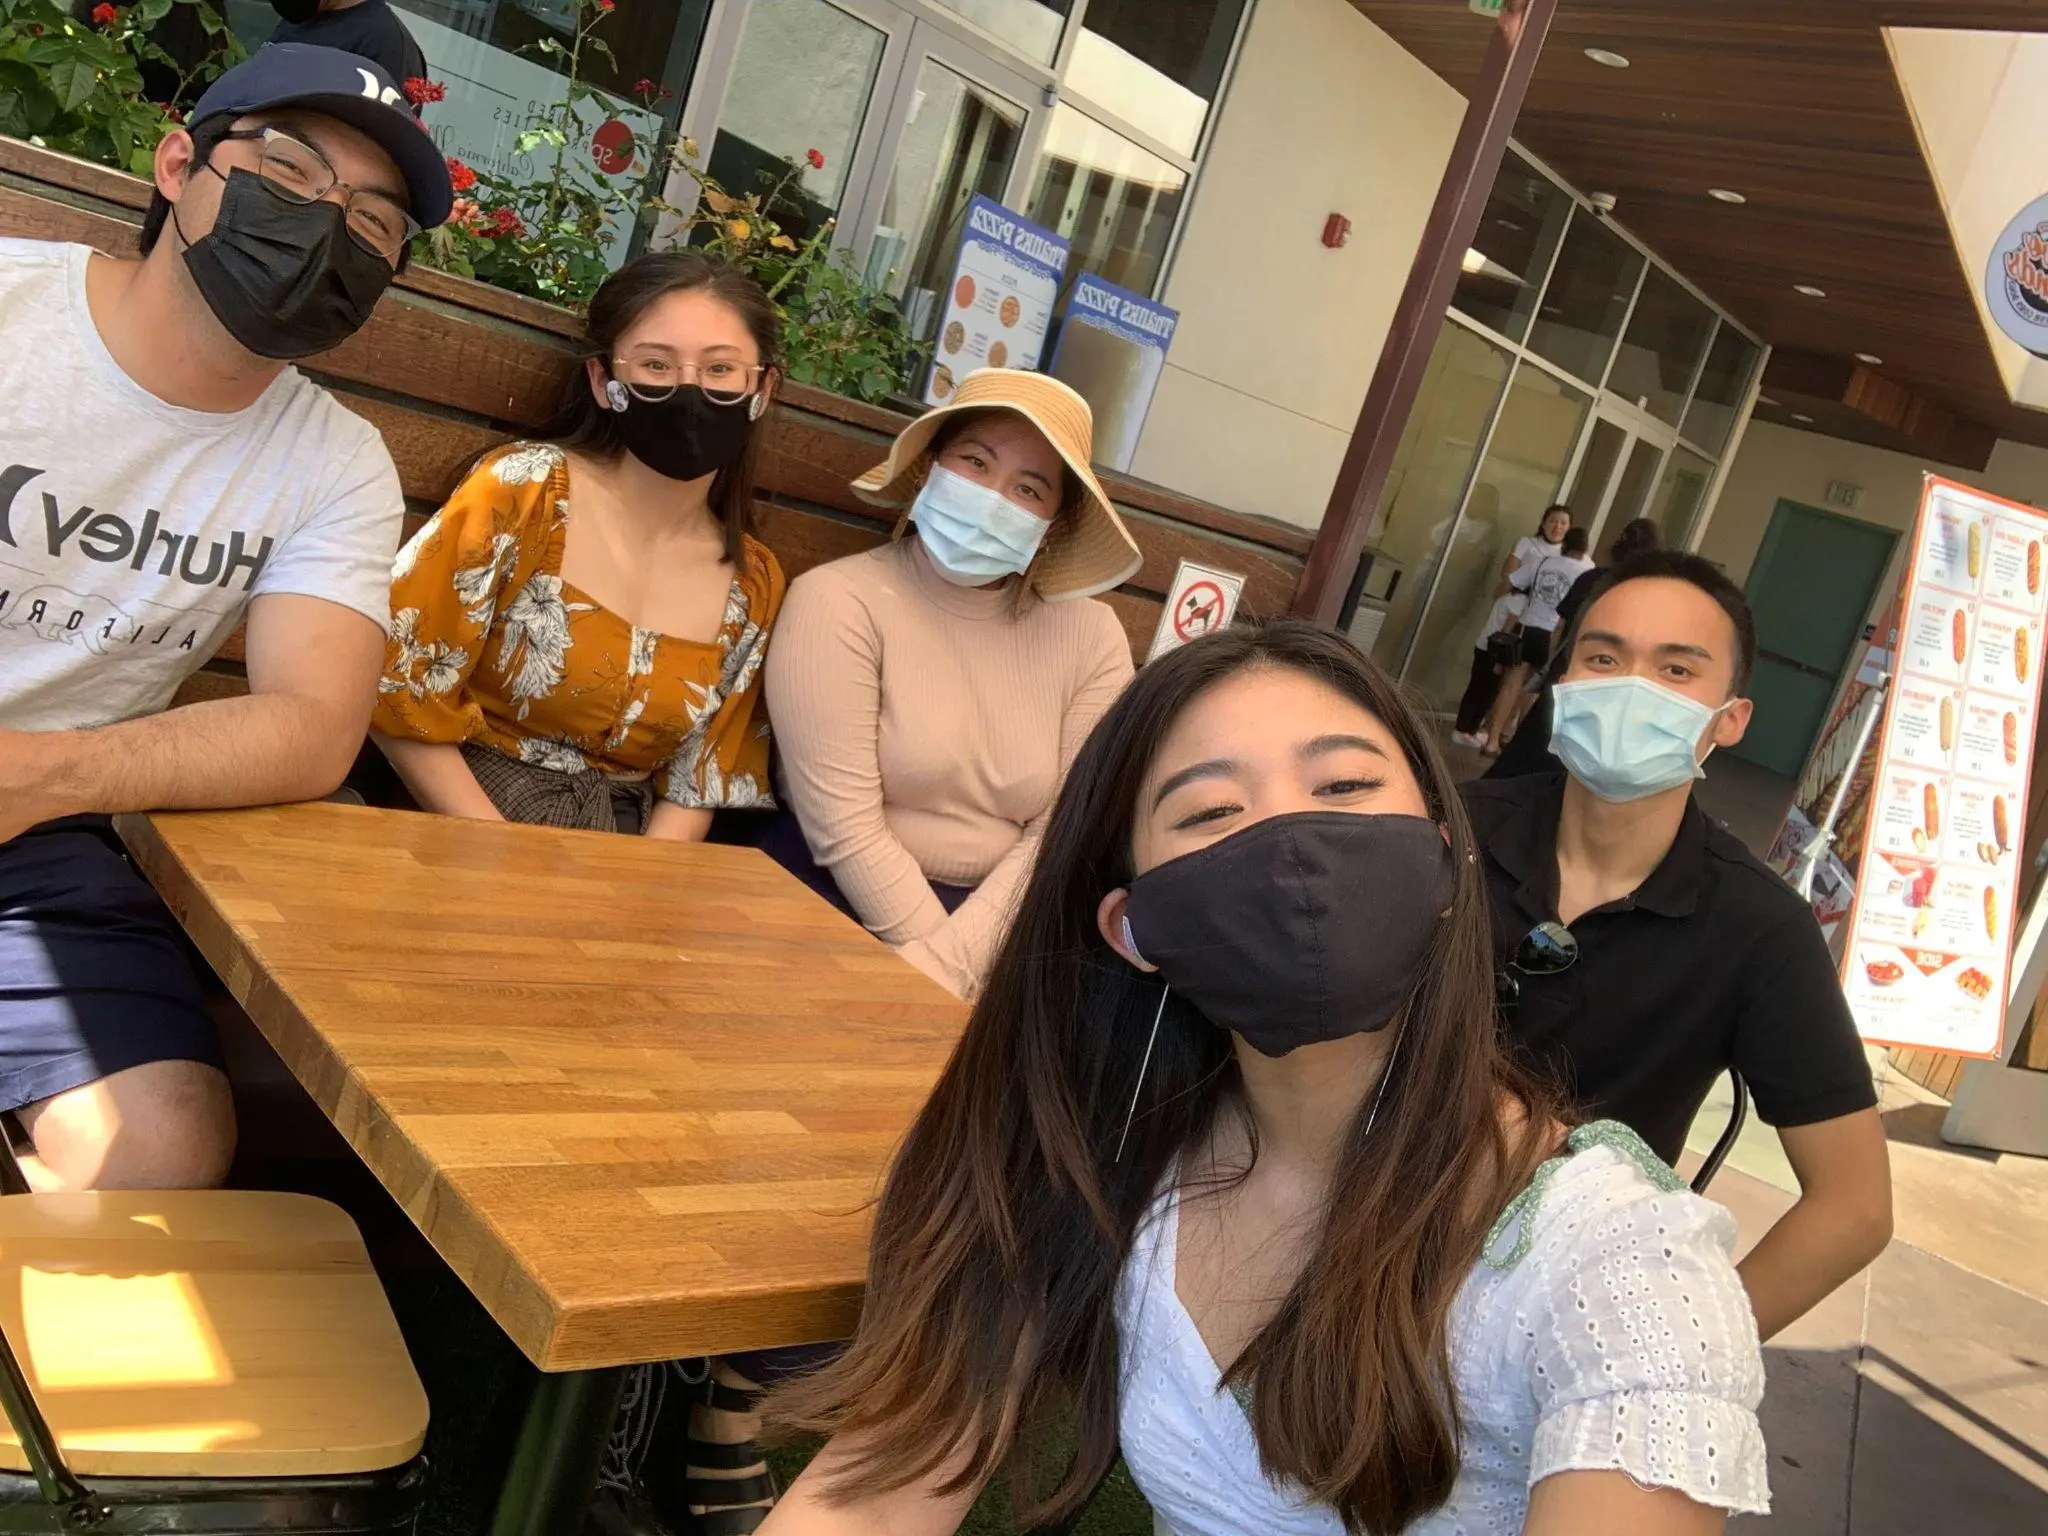 The writer and story subjects pose for a selfie while wearing masks.